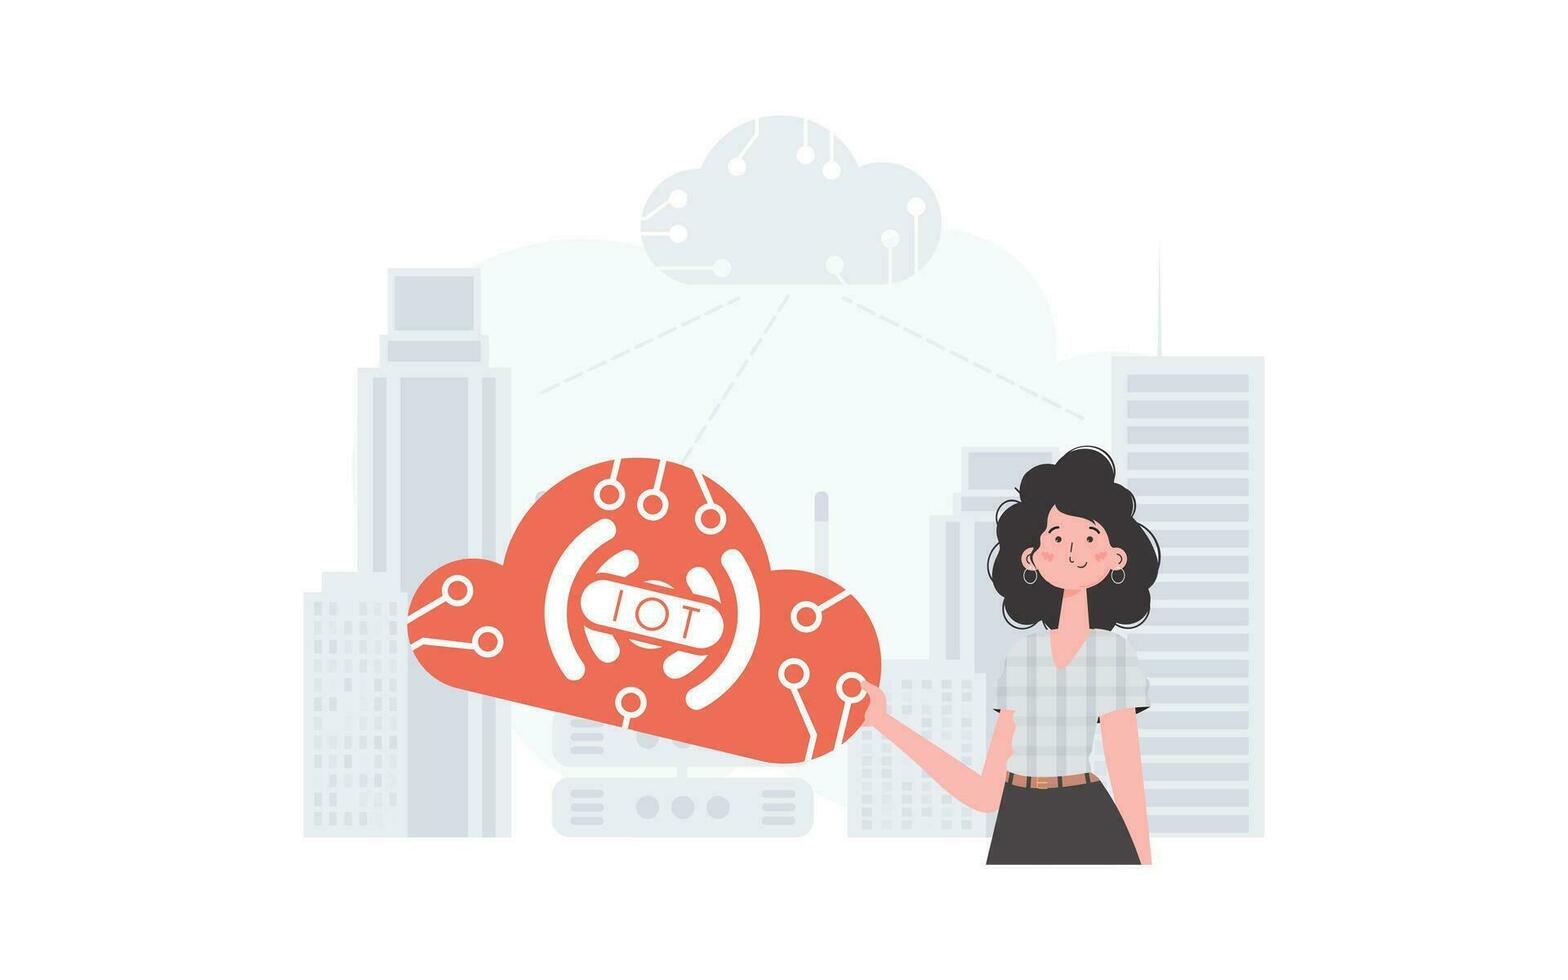 A woman is holding an internet thing icon in her hands. Internet of things and automation concept. Good for websites and presentations. Vector illustration in flat style.